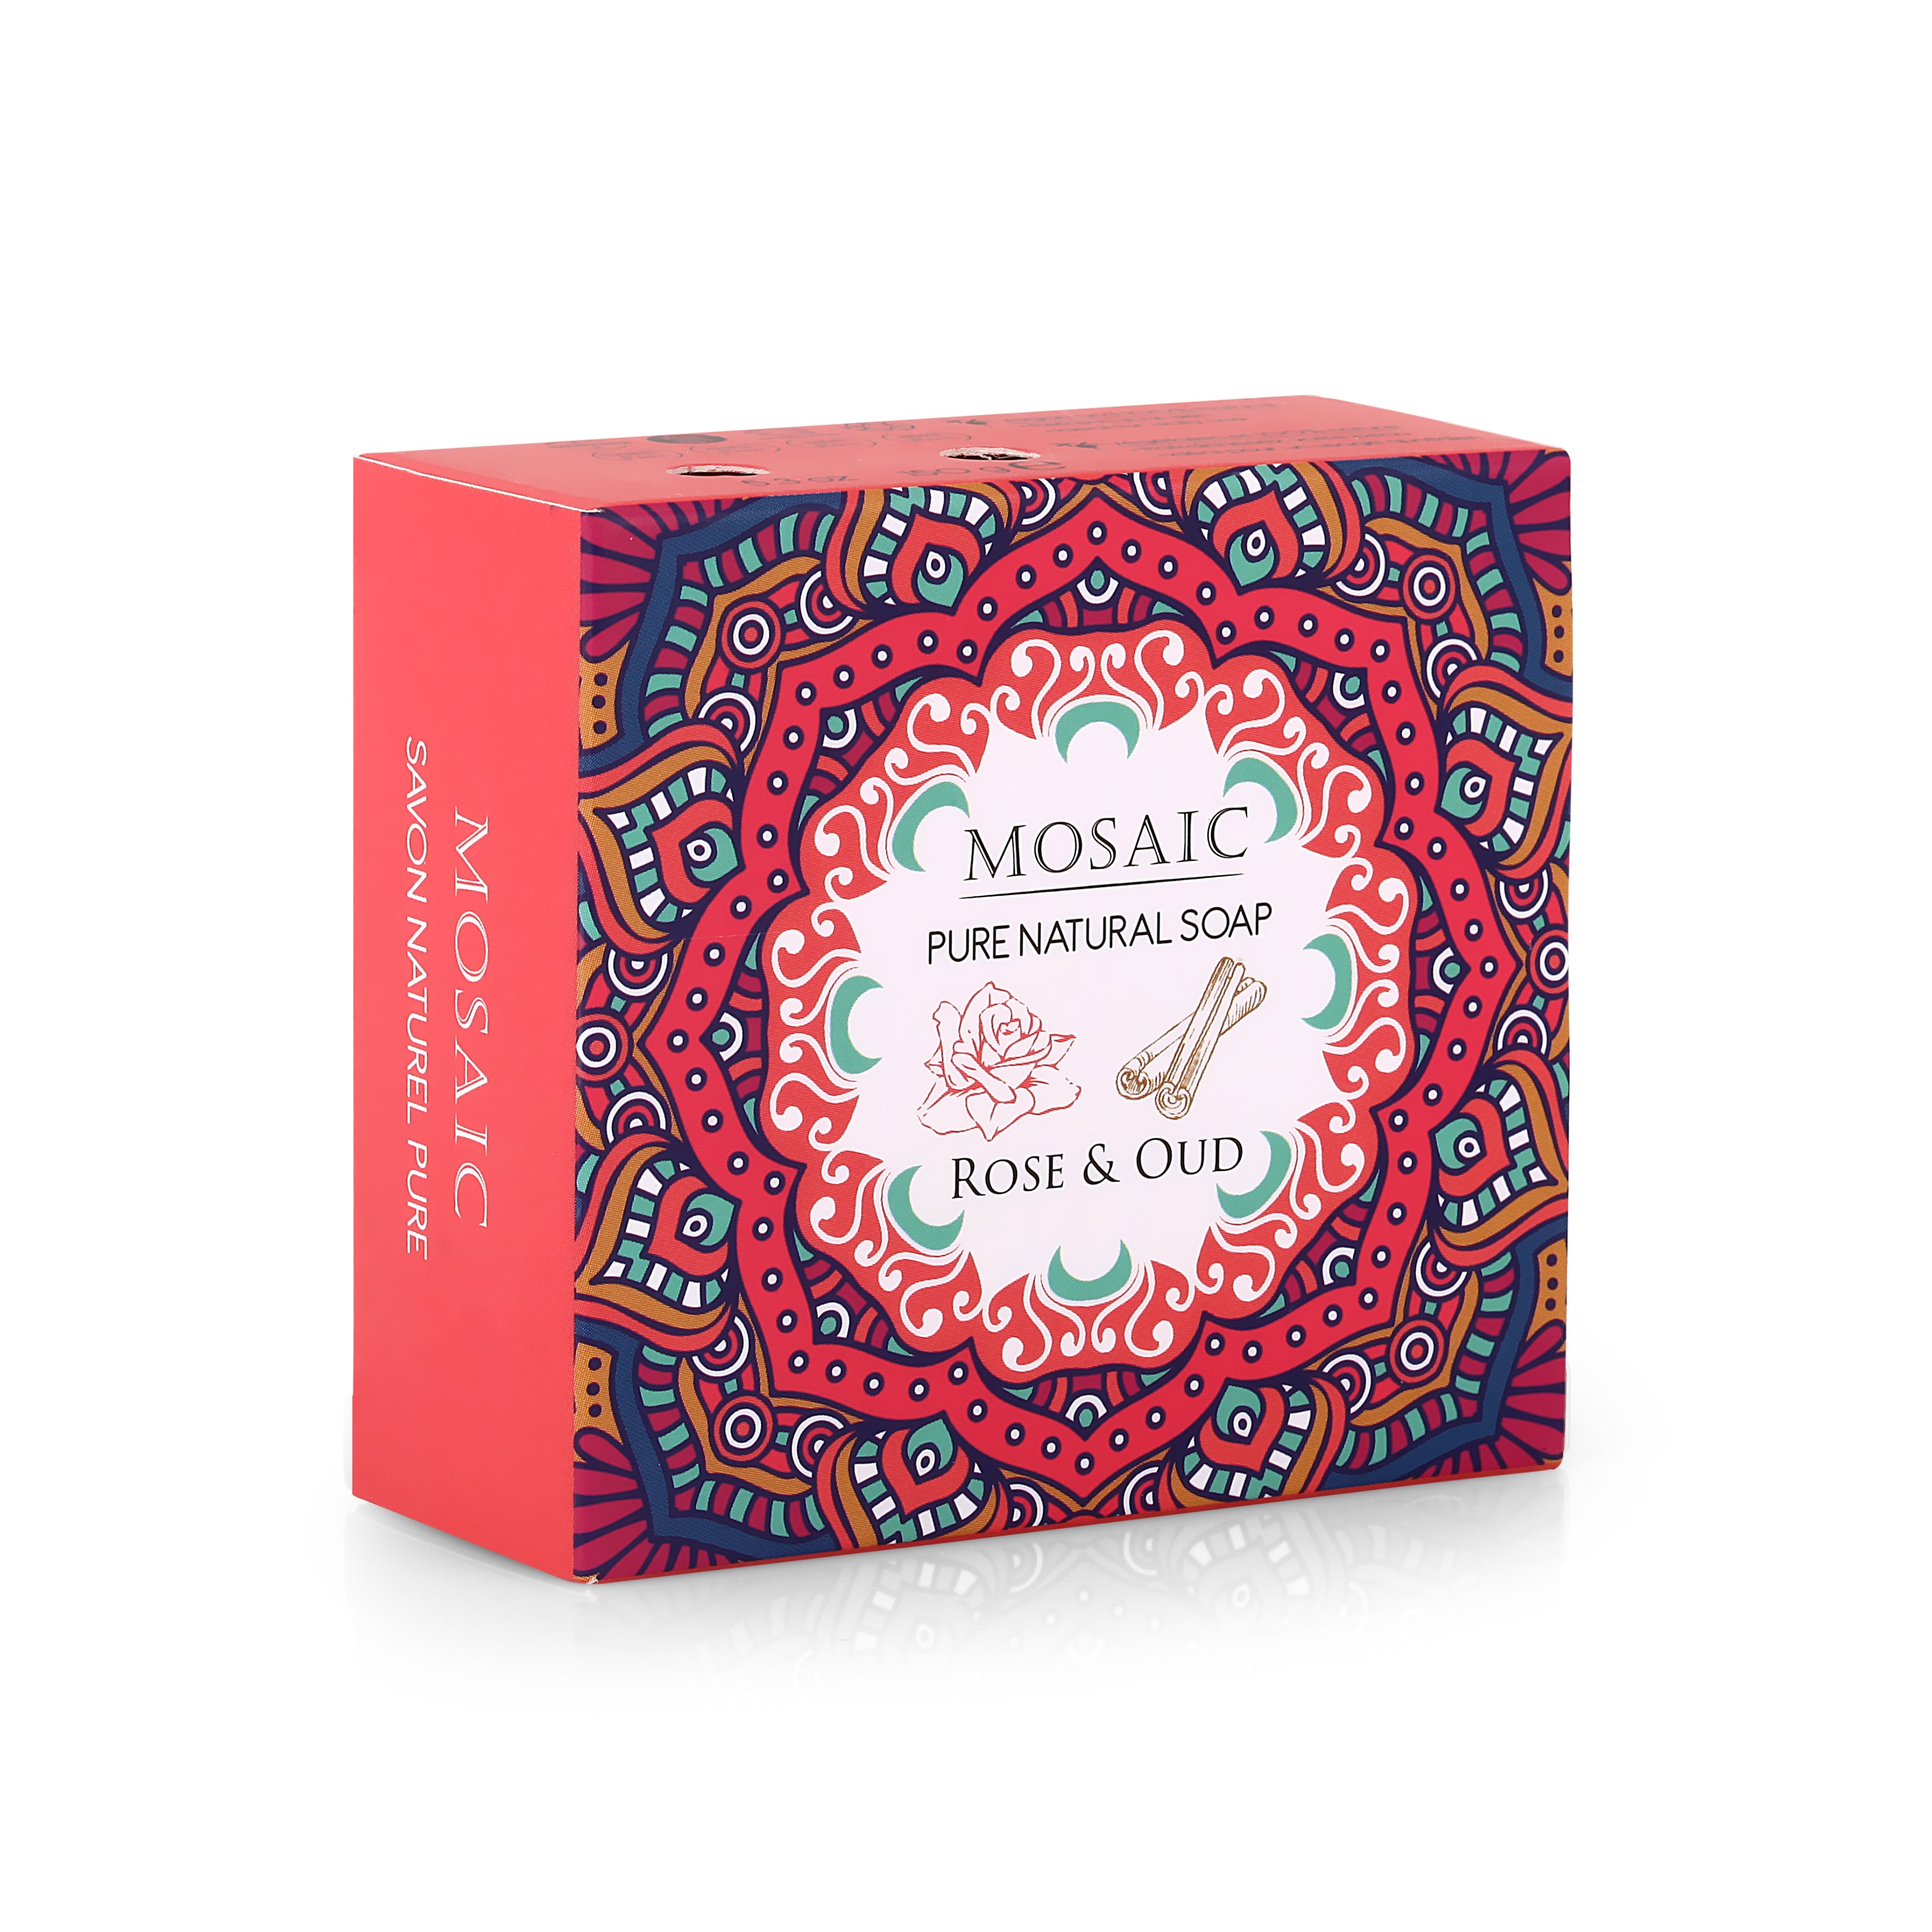 Rose & Oud Beauty Soap with Olive Oil, 5.3 oz